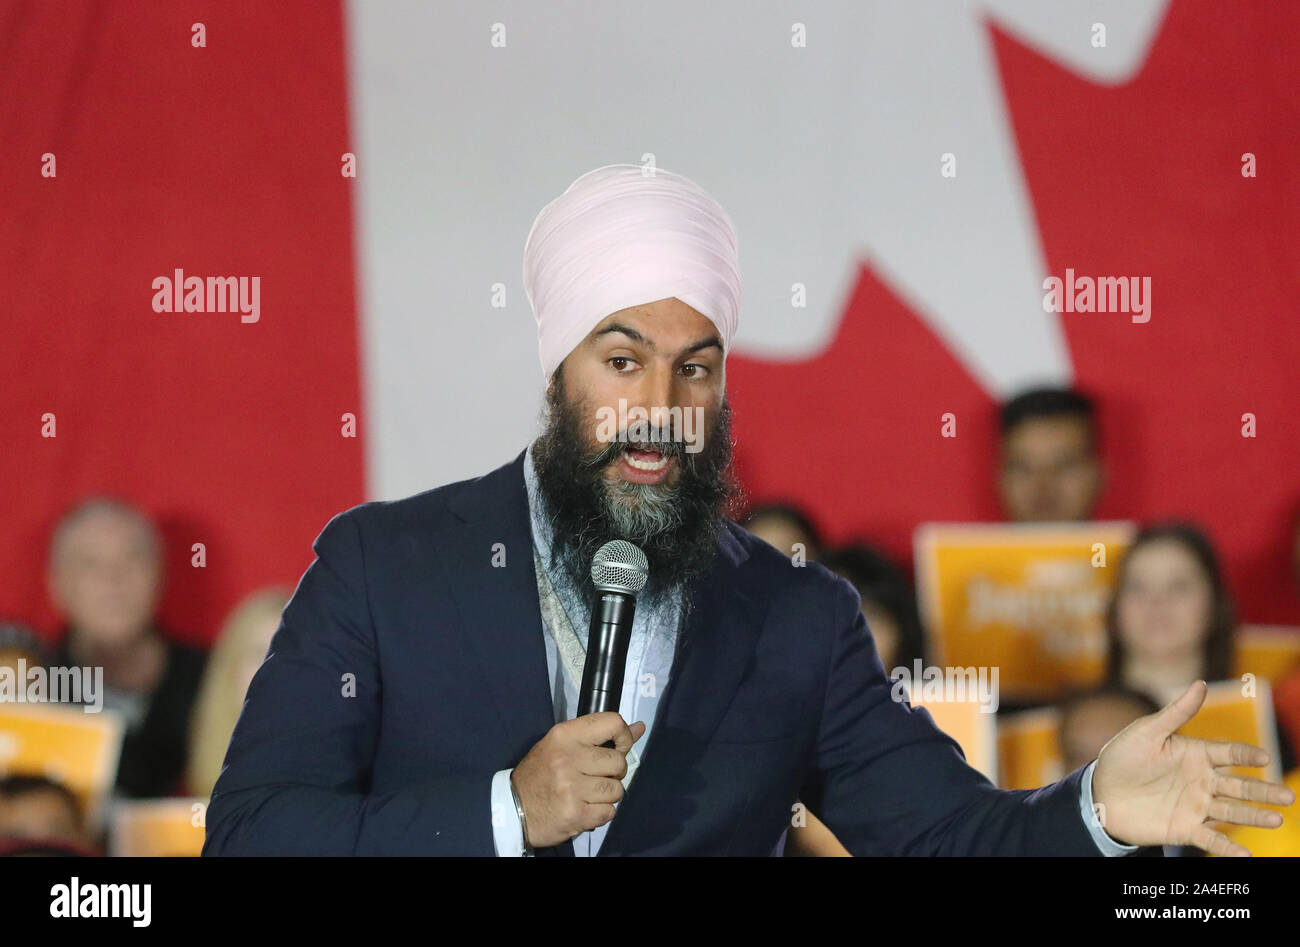 Canadian NDP Party leader Jagmeet Singh speaks at a rally in Surrey, British Columbia on Sunday, October 13, 2019 during a day of federal election campaigning in the BC lower mainland. Election day is October 21, 2019.  Photo by Heinz Ruckemann/UPI Stock Photo